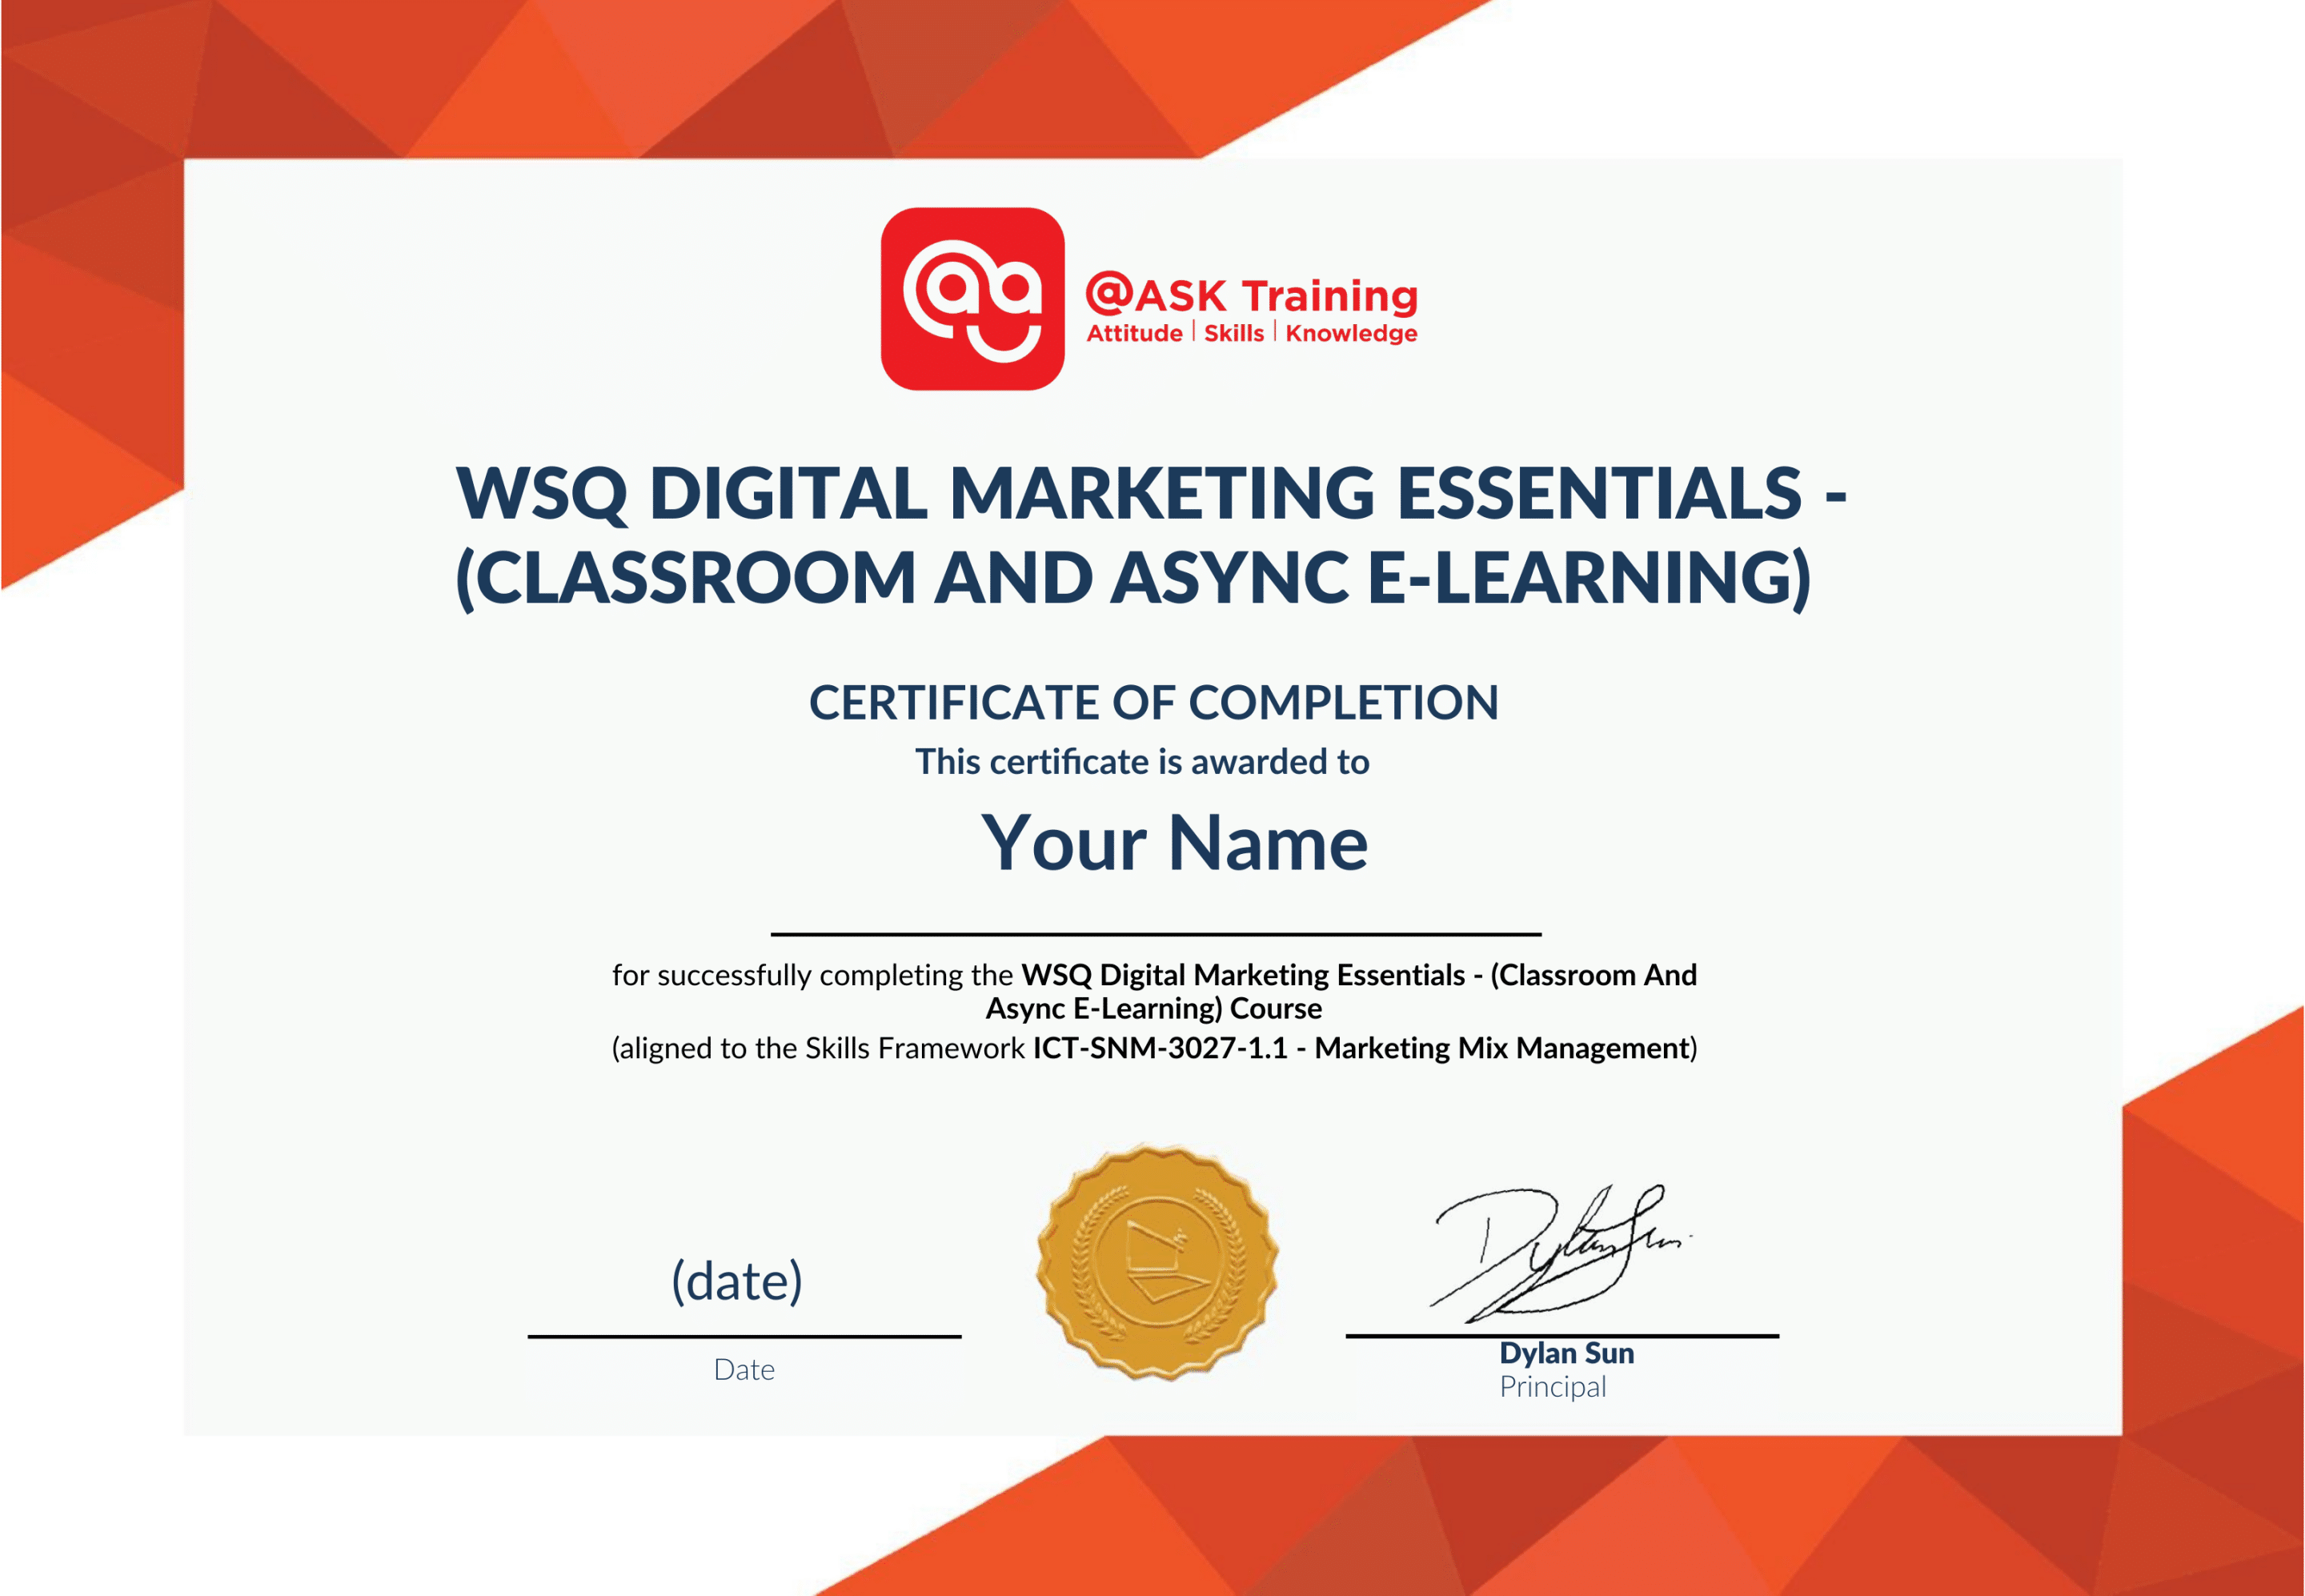 WSQ Digital Marketing Essentials - (Classroom and Async E-learning) Certificate Sample